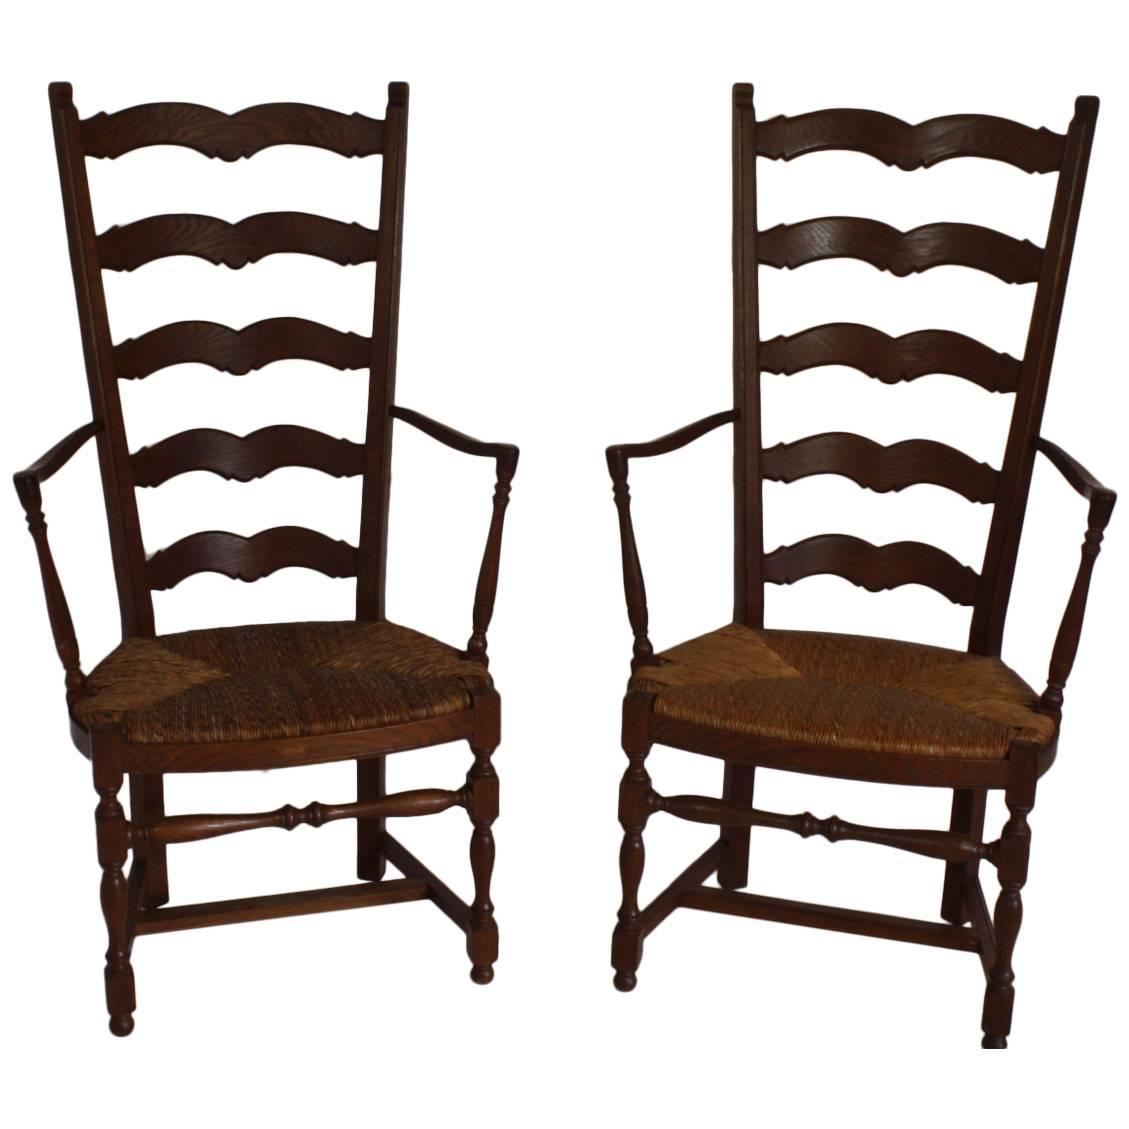 French Country High Ladder Back Armchairs, circa 1900